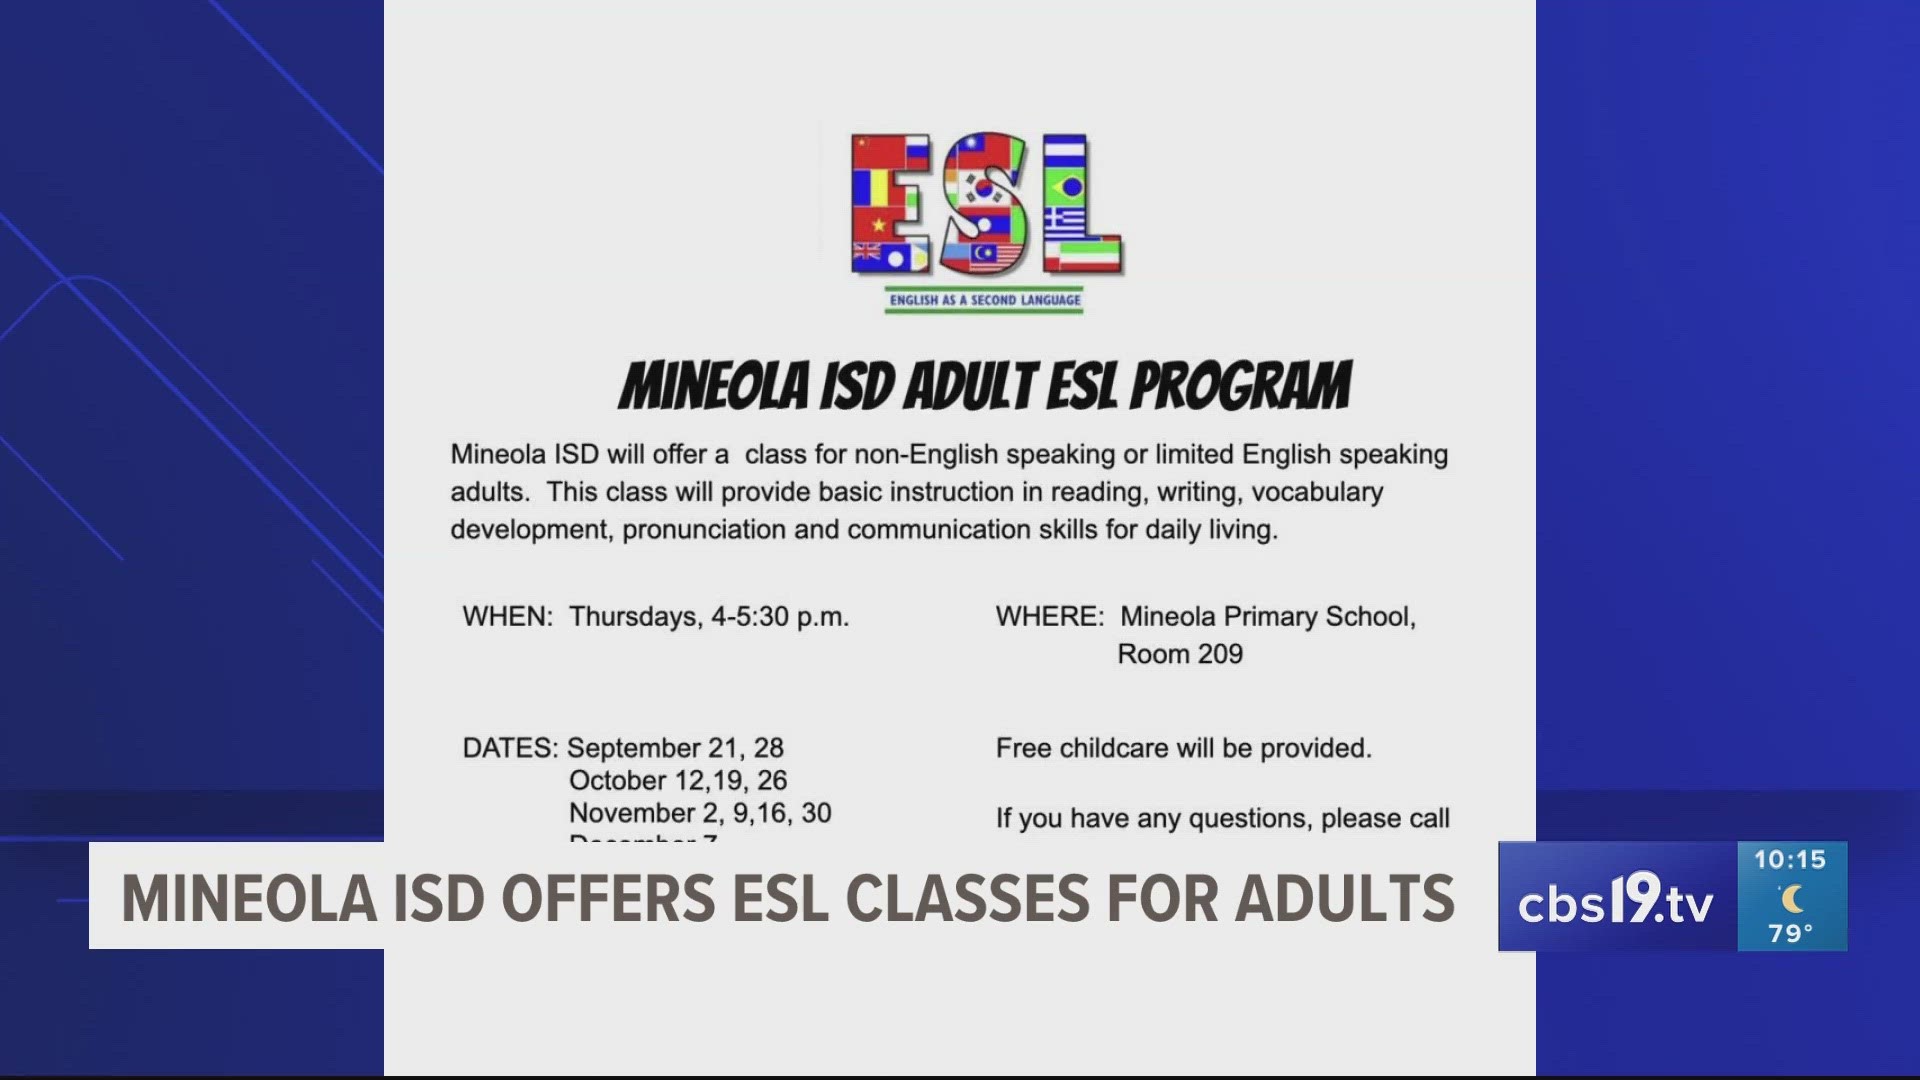 Mineola ISD offers English classes to Spanish-speaking parents to bridge language barriers